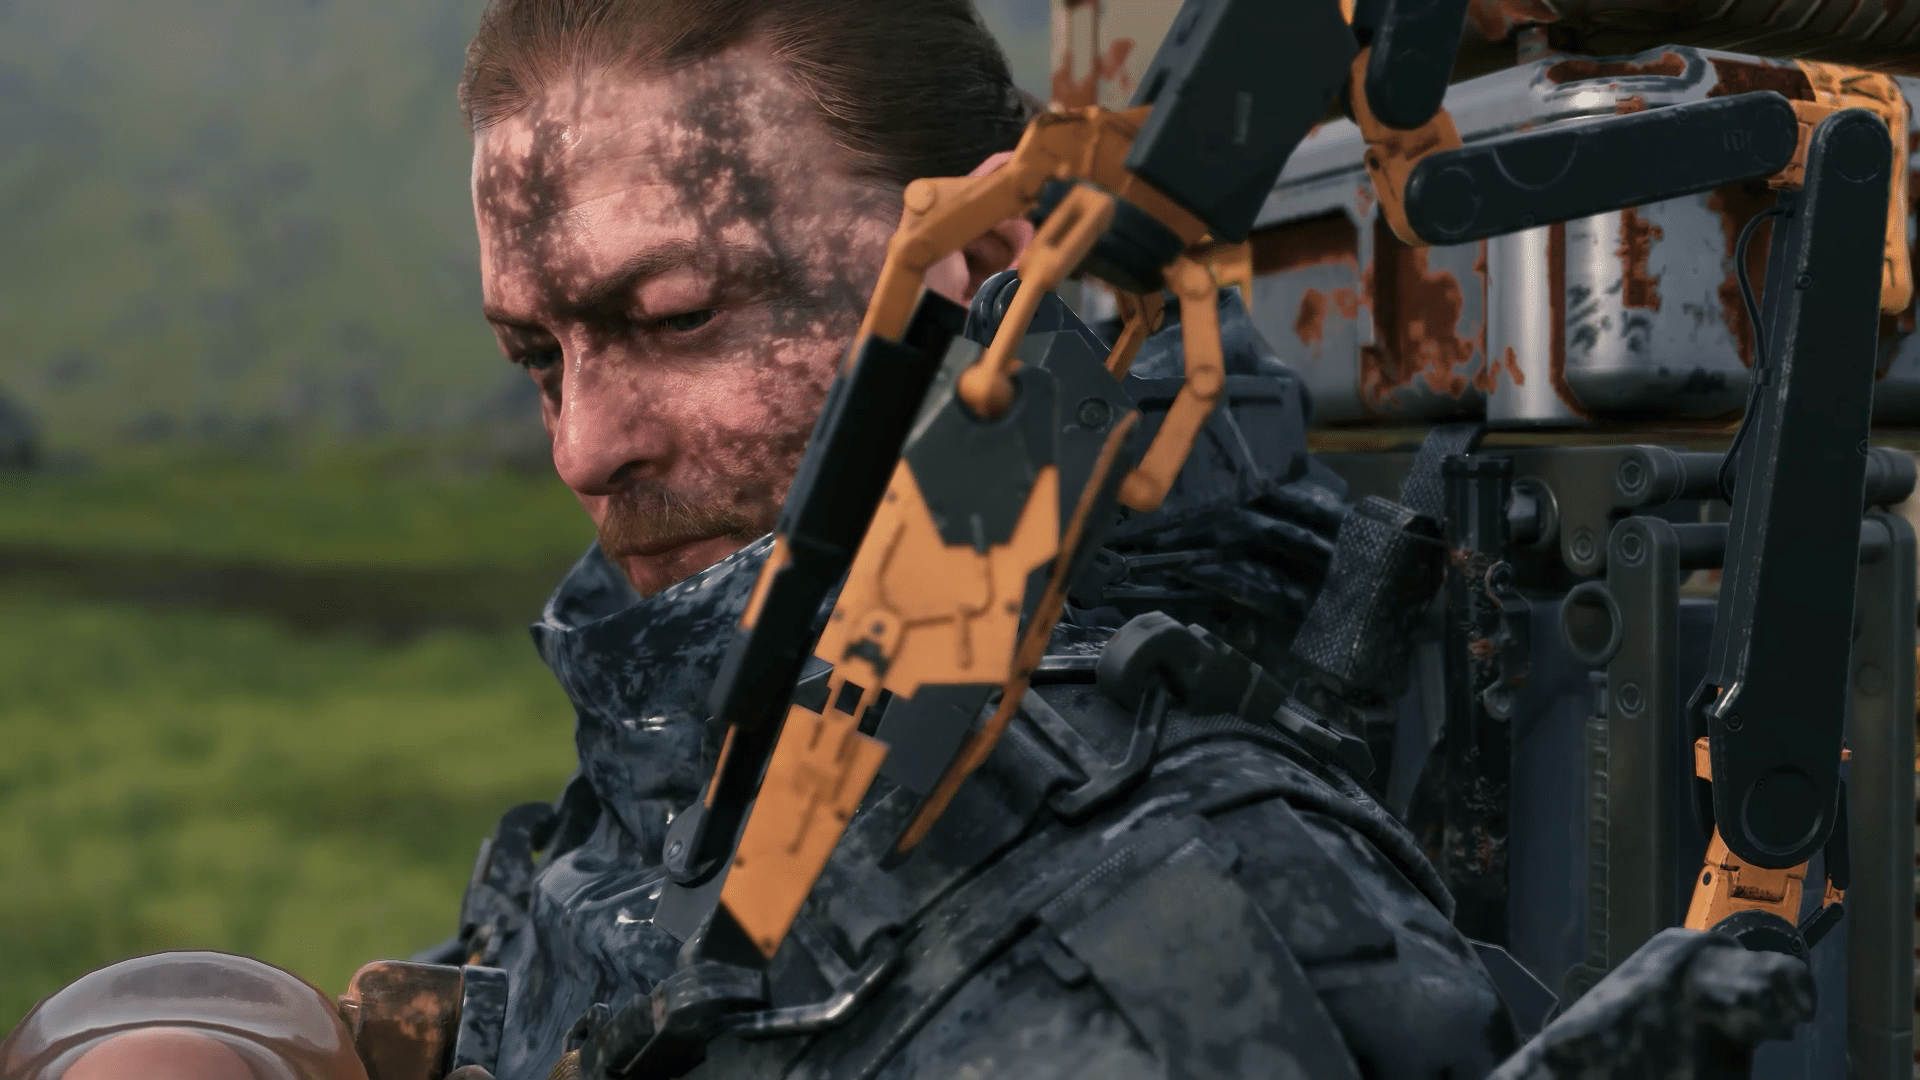 Death Stranding: Director's Cut review